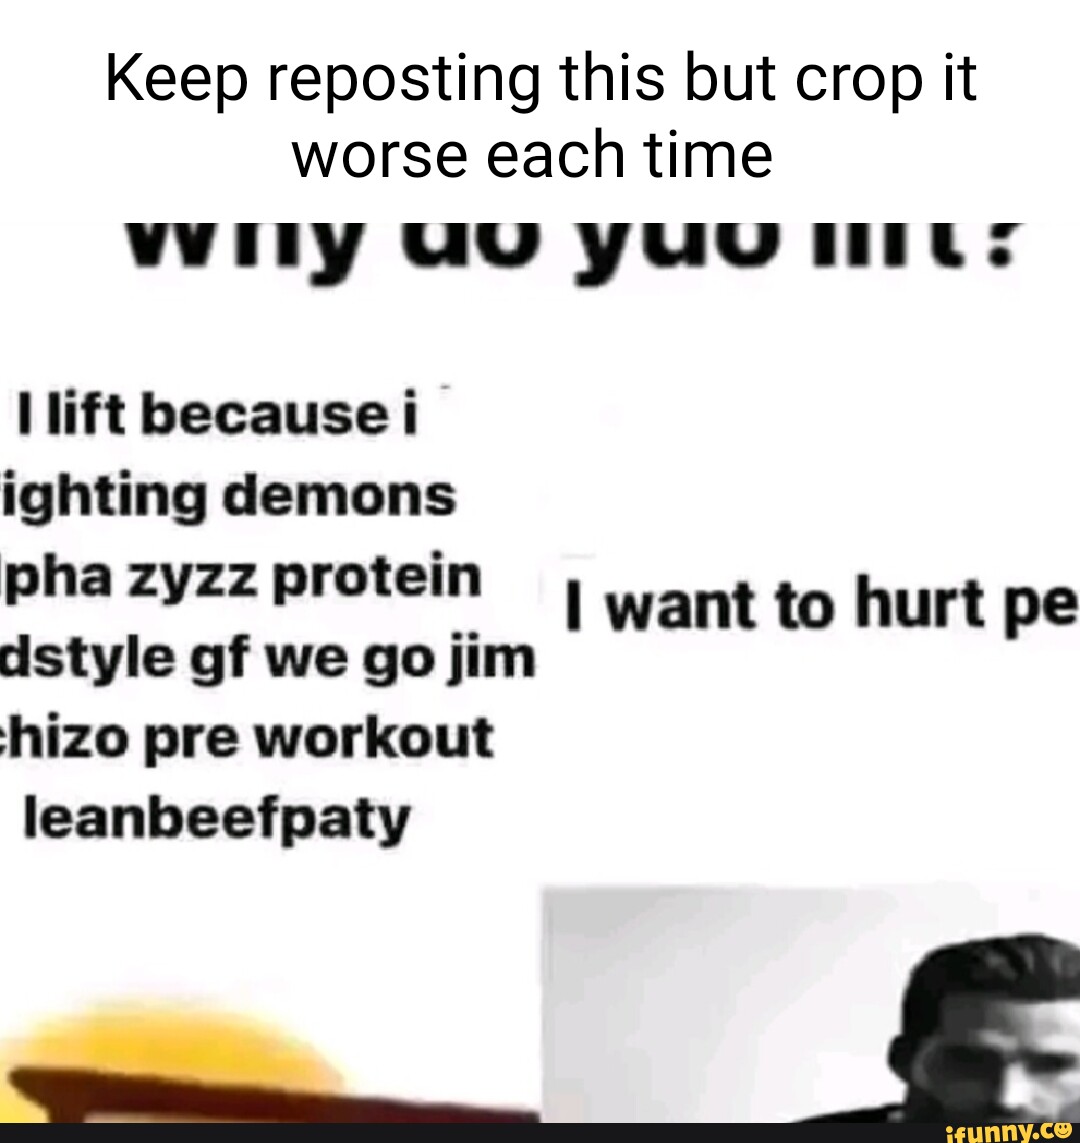 Keep Reposting This But Crop It Worse Each Time Witty Lift Because I Ighting Demons Pha Zyzz